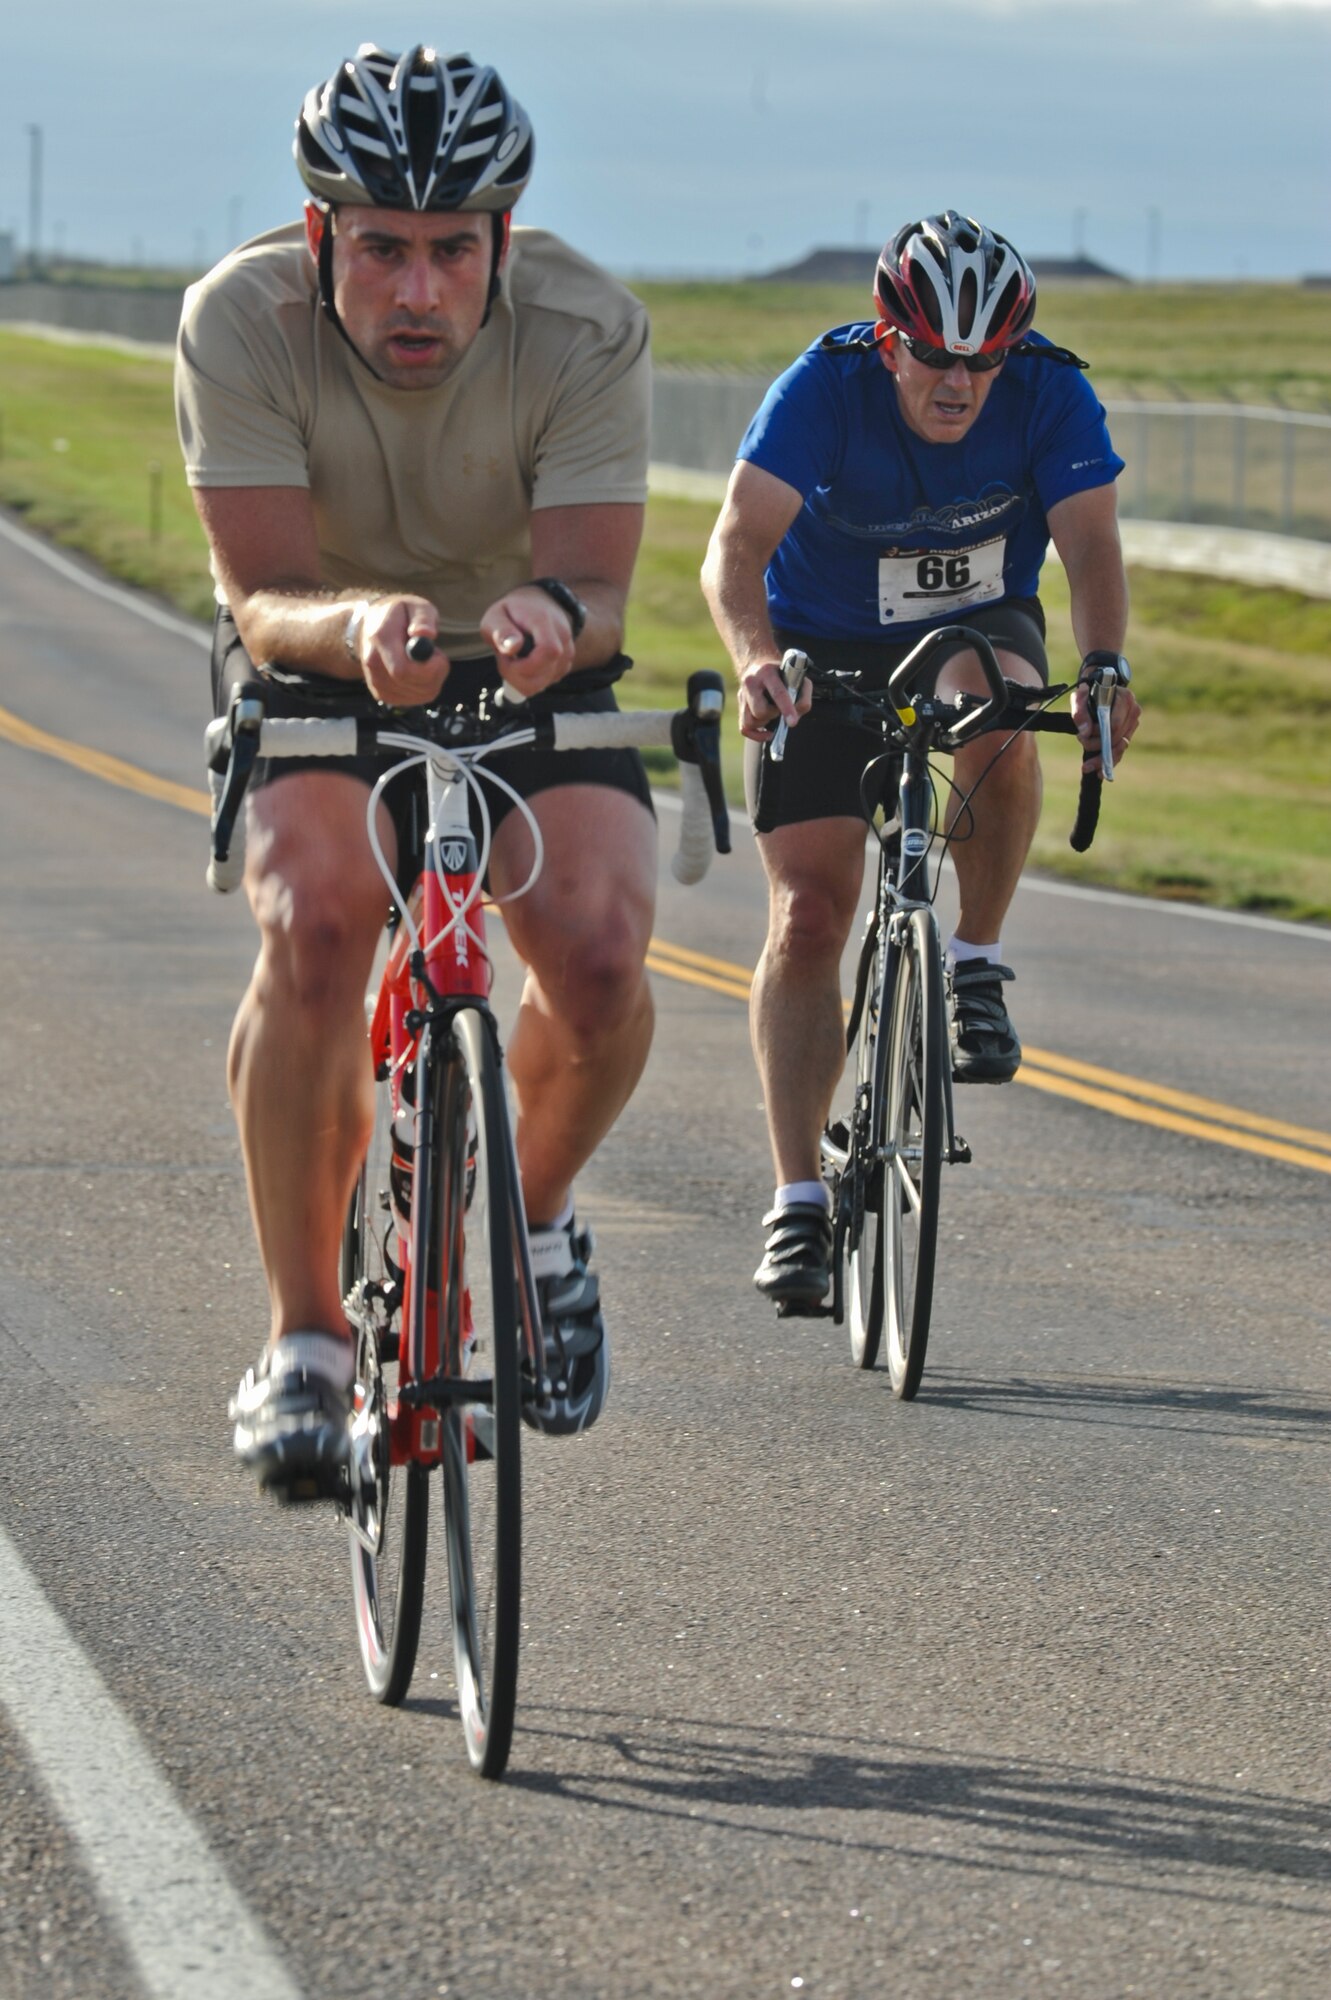 John Eure pedals past an opponent during the 2nd Annual Buckley Duathlon Sept. 19, 2013, on Buckley Air Force Base, Colo. The race started with a 2-mile run, followed by a 6-mile bike ride and finished with a 1.5-mile run. (U.S. Air Force photo by Airman 1st Class Riley Johnson/Released)